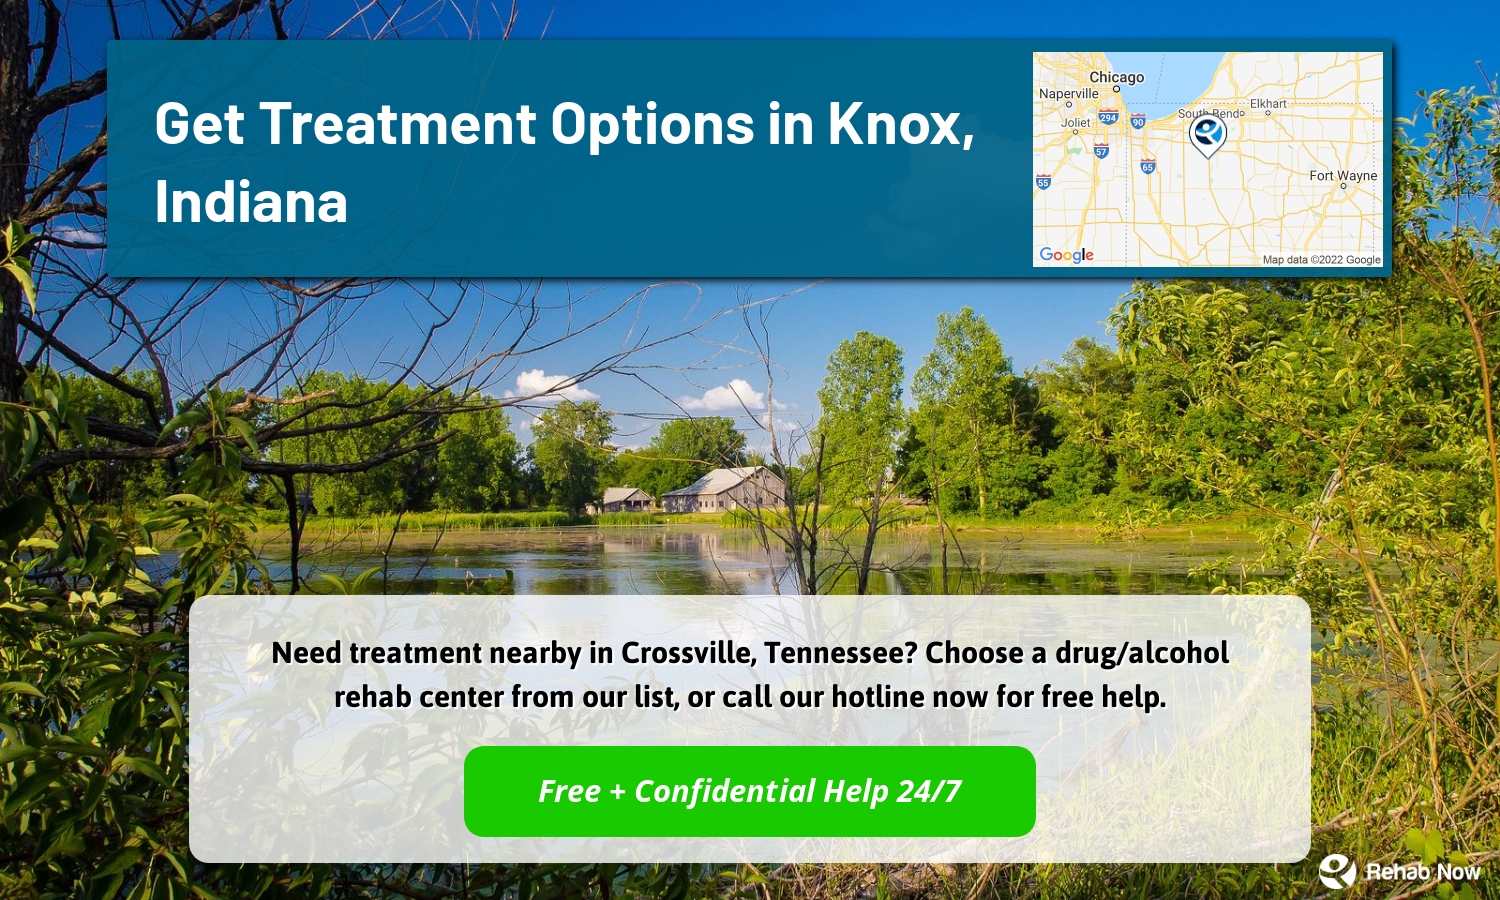 Need treatment nearby in Crossville, Tennessee? Choose a drug/alcohol rehab center from our list, or call our hotline now for free help.